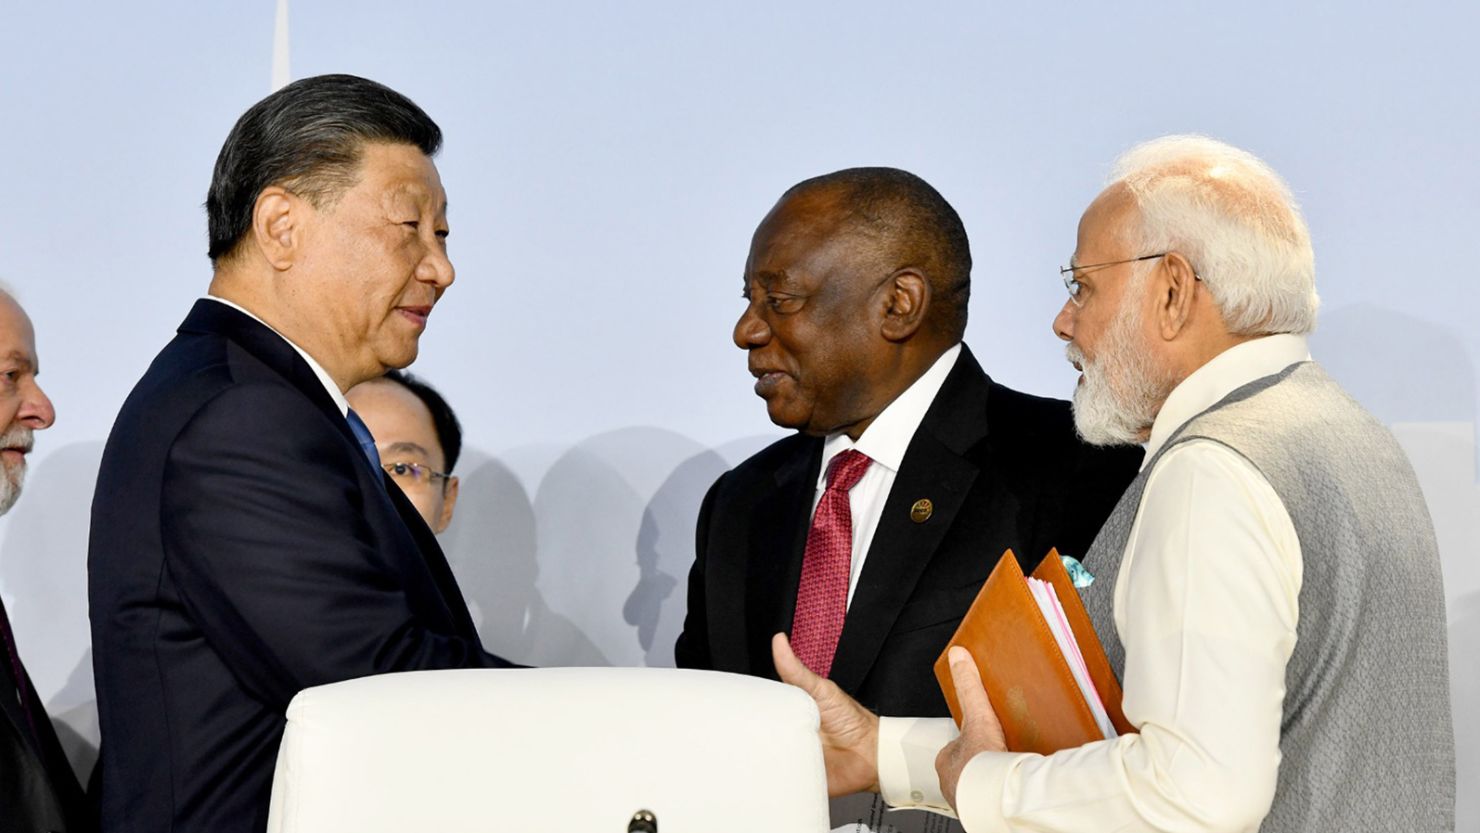 Chinese leader Xi Jinping, South African President Cyril Ramaphosa and Indian Prime Minister Narendra Modi at the BRICS Summit in Johannesburg, South Africa, on August 24.